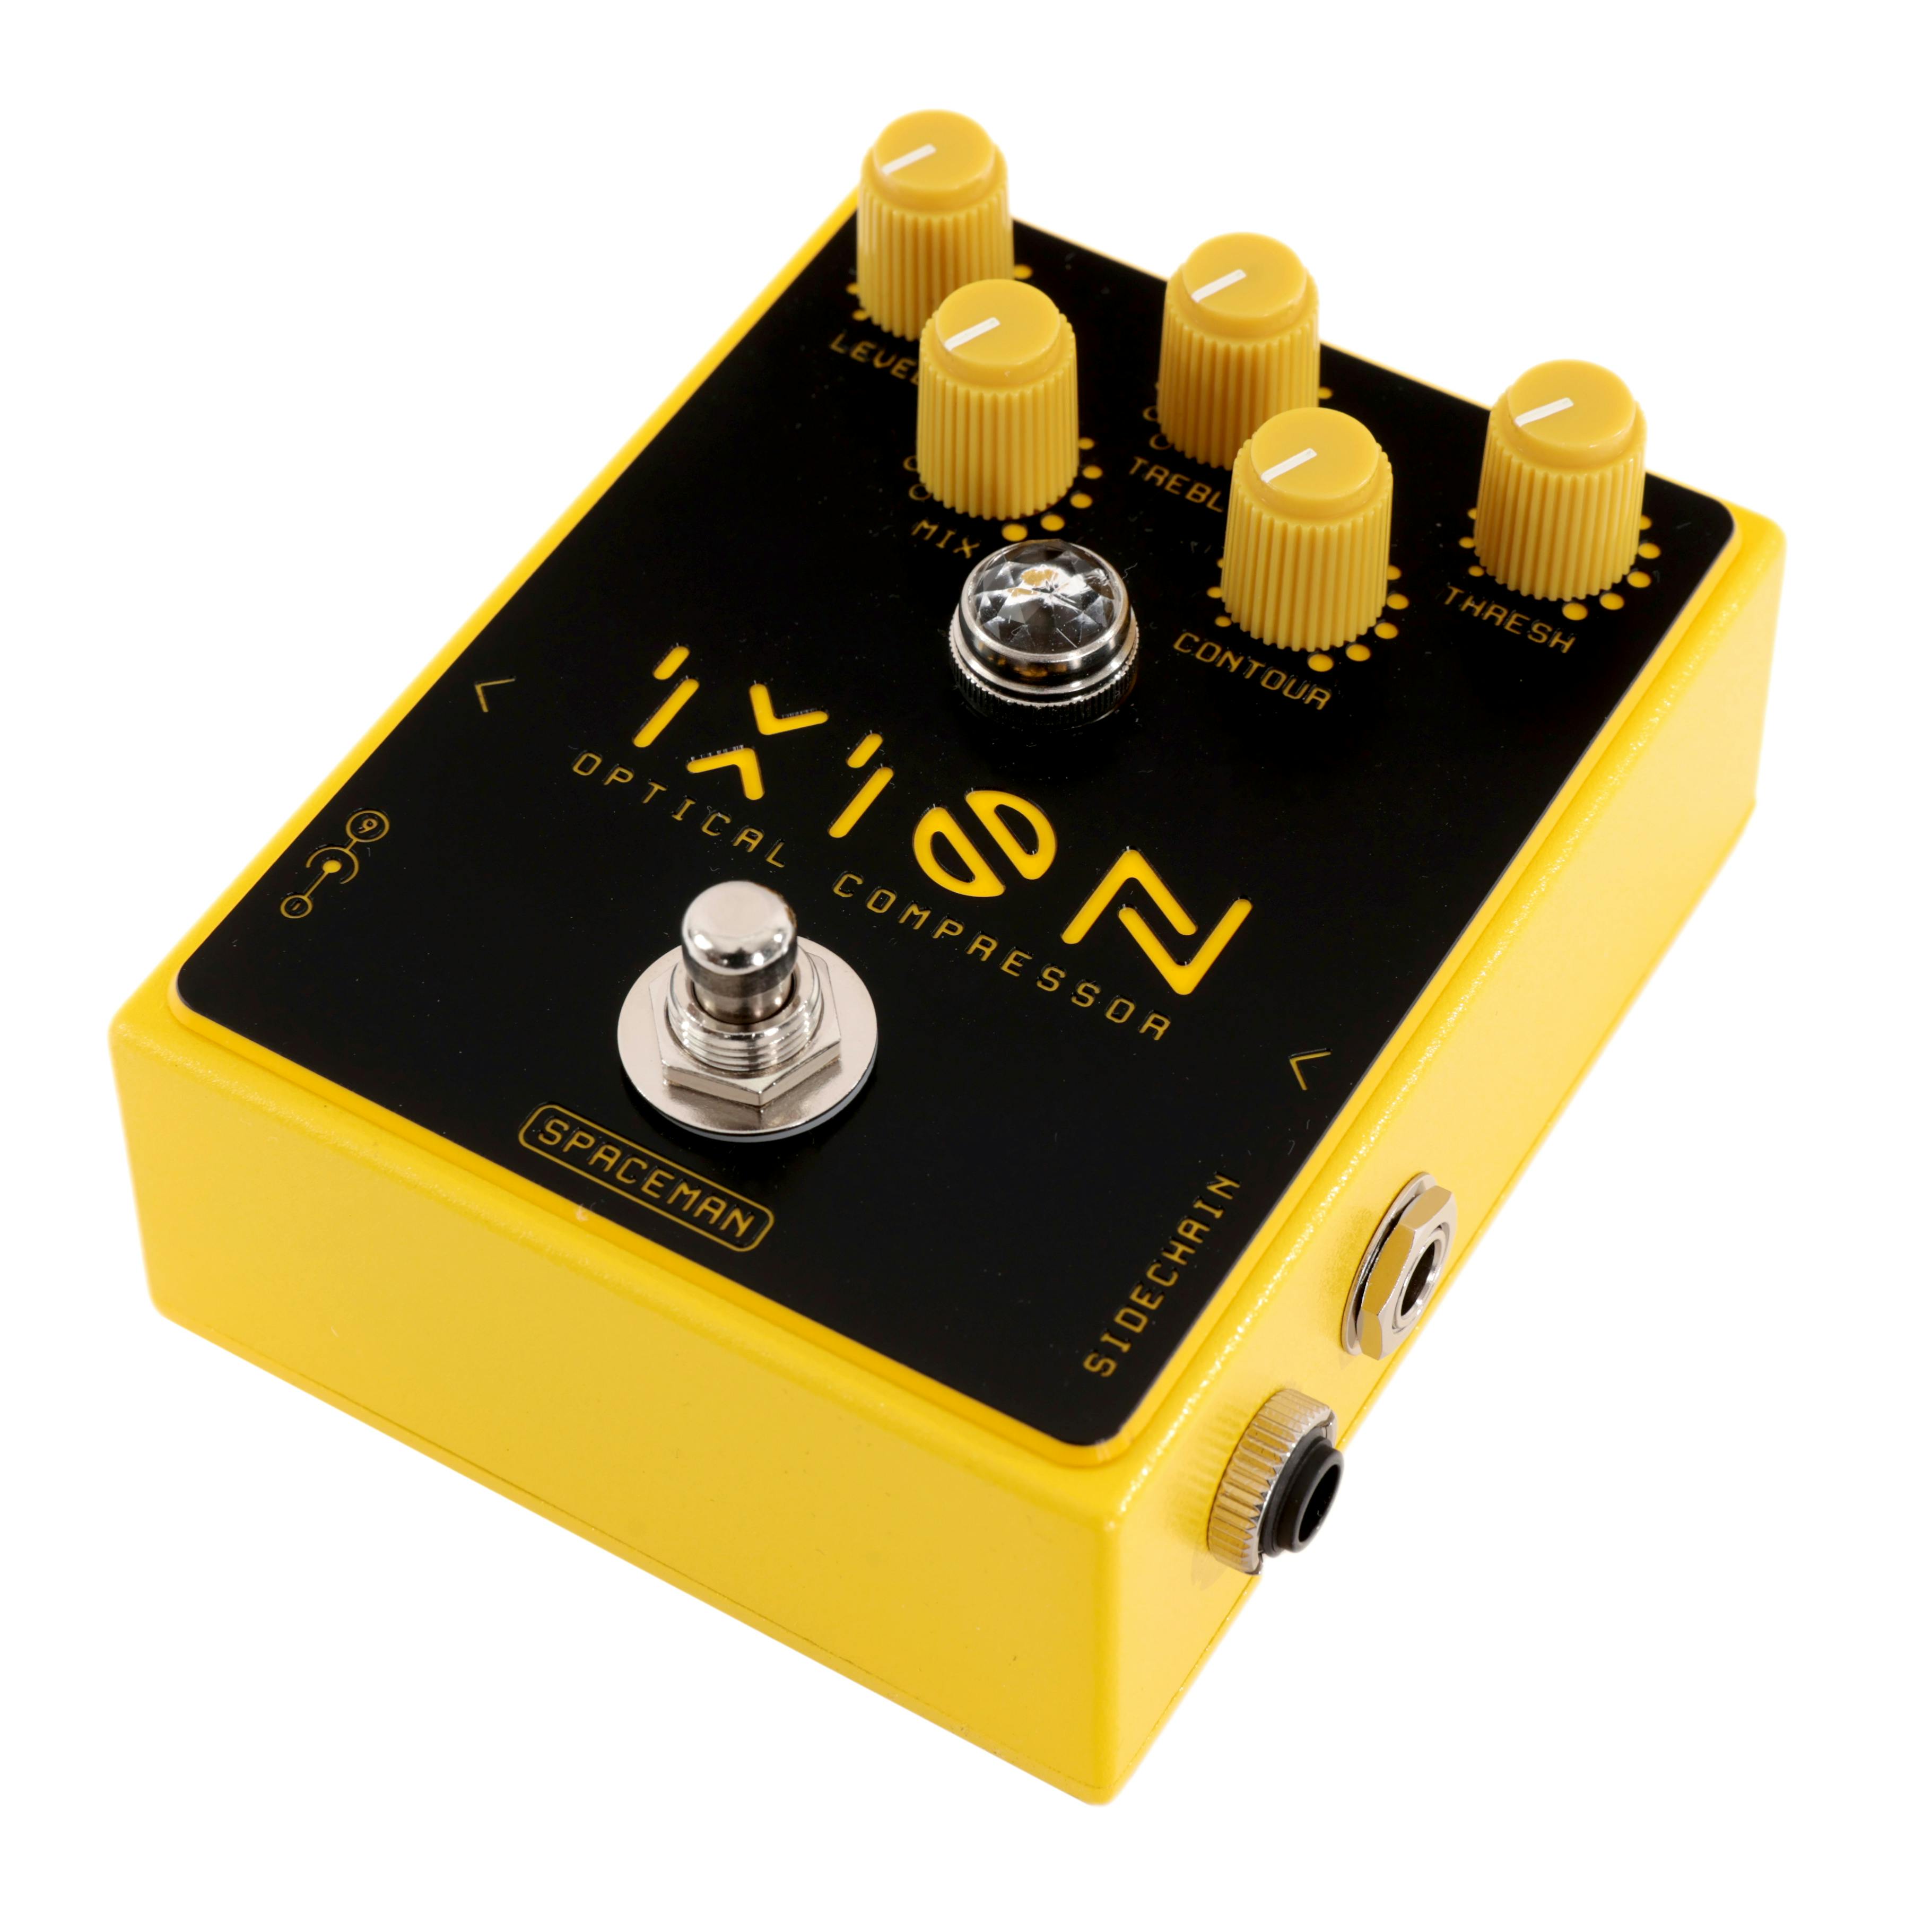 Spaceman Ixion optical compressor yellow - The Sound Parcel